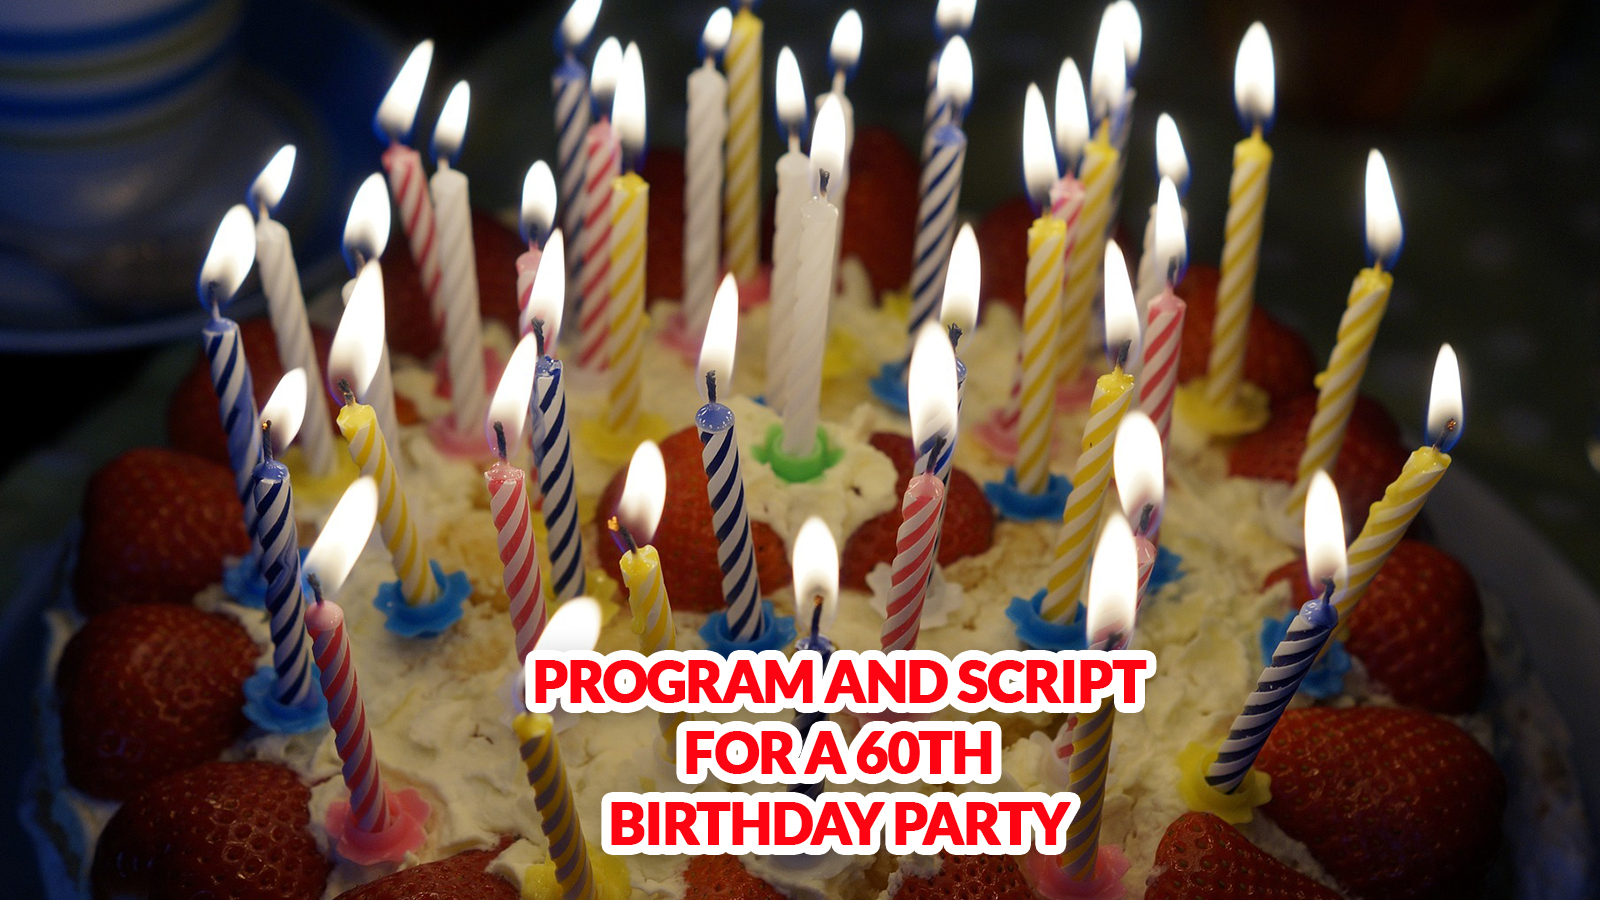 How to Plan an Unforgettable 60th Birthday Party with Our Program and Script